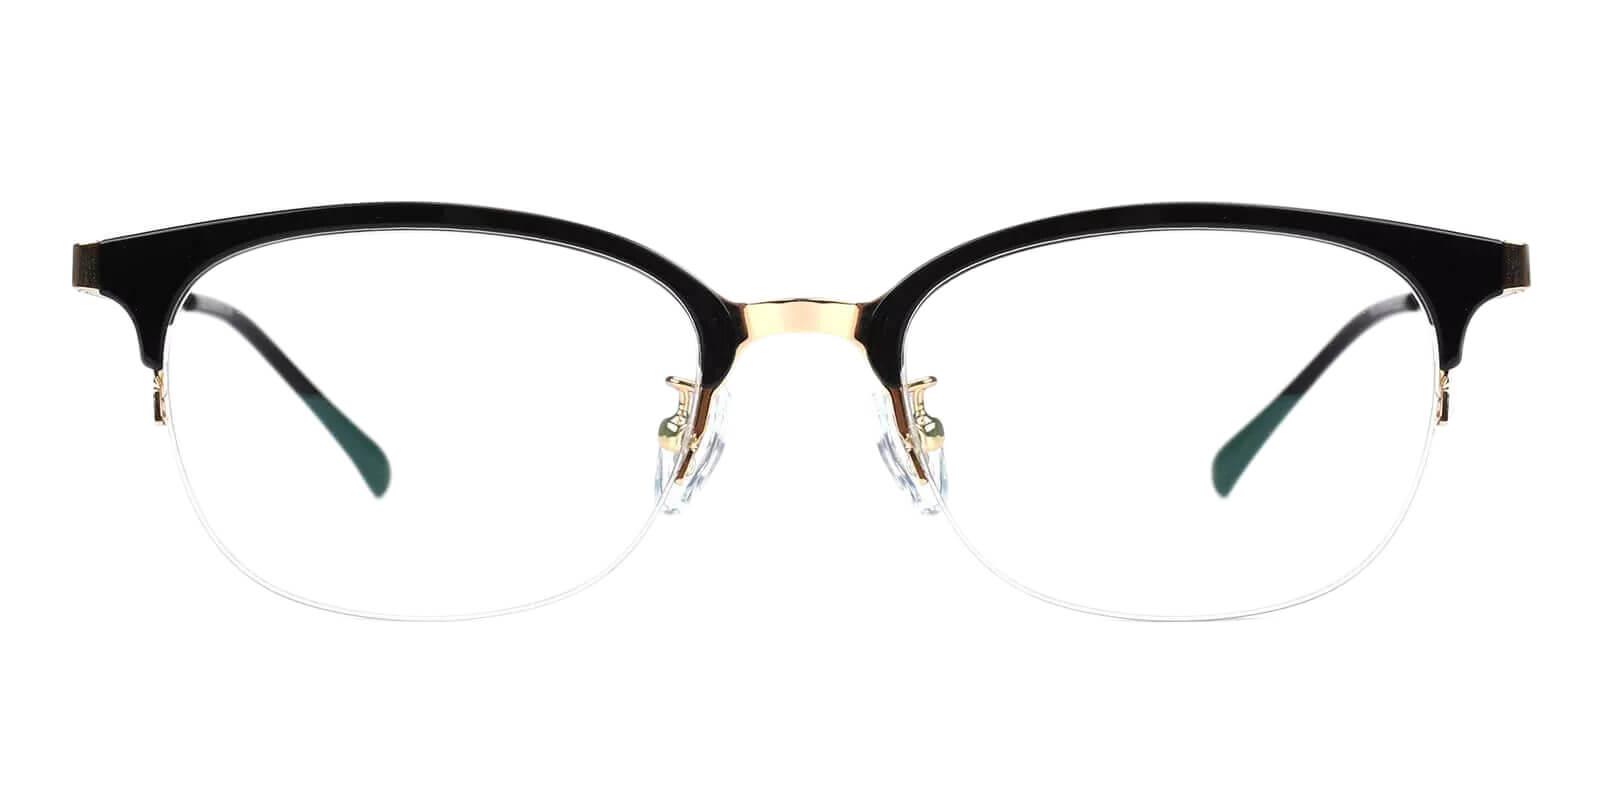 Polly Black Combination Eyeglasses , Fashion , NosePads Frames from ABBE Glasses